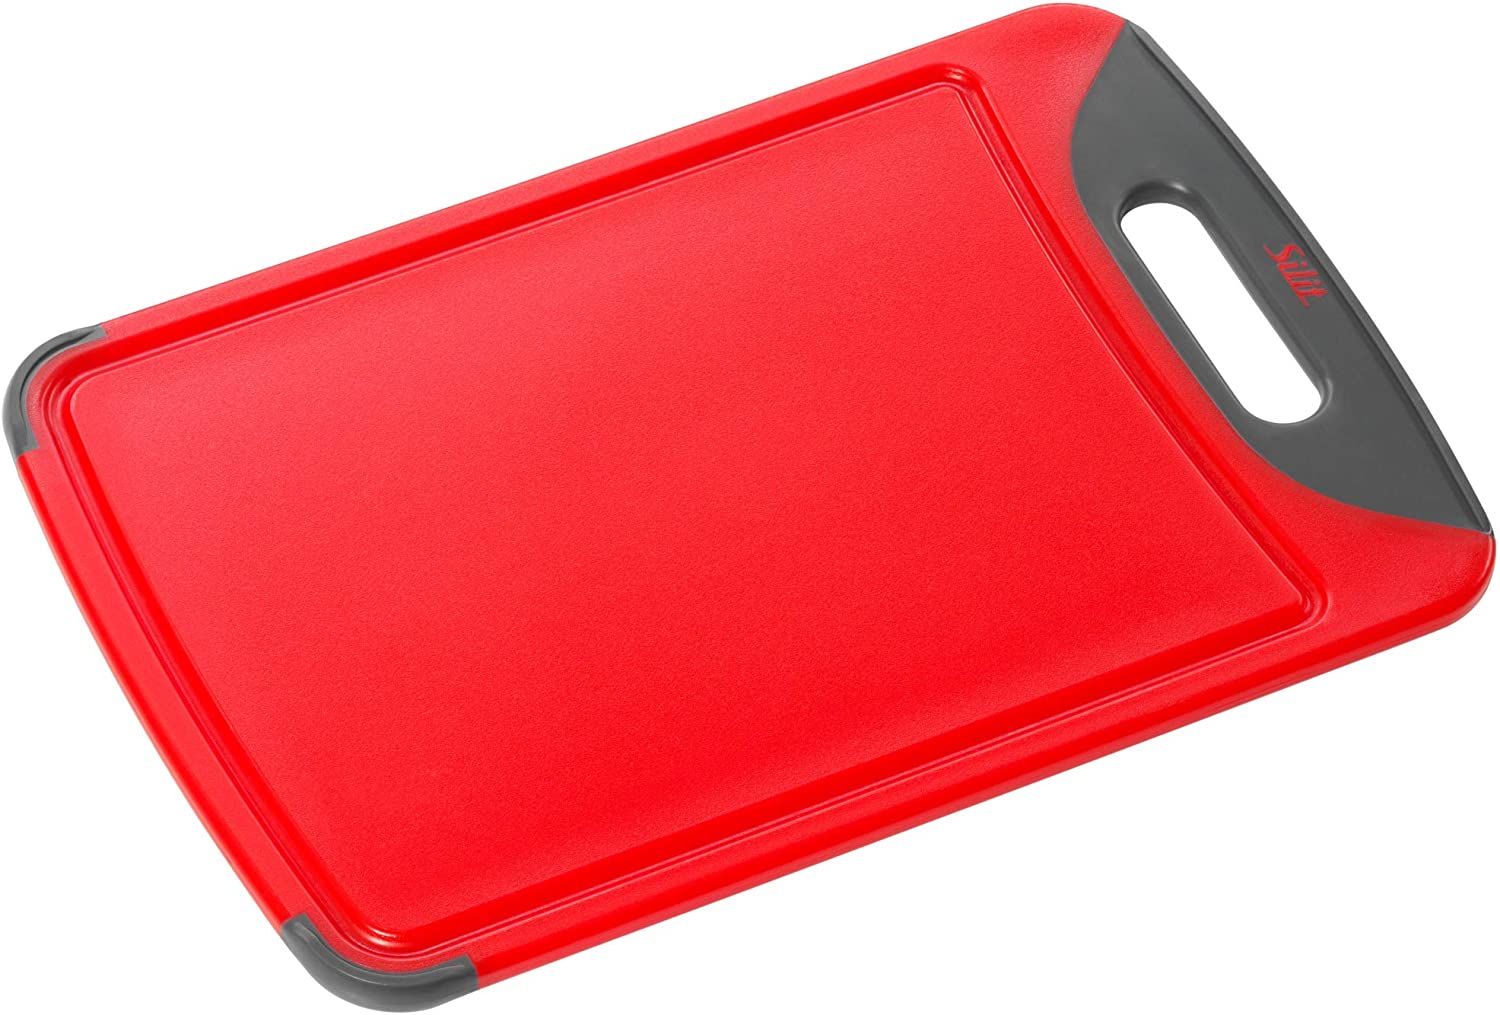 Silit 0020.7681.01 Chopping Board Anti-Bacterial Red 38 x 25 cm